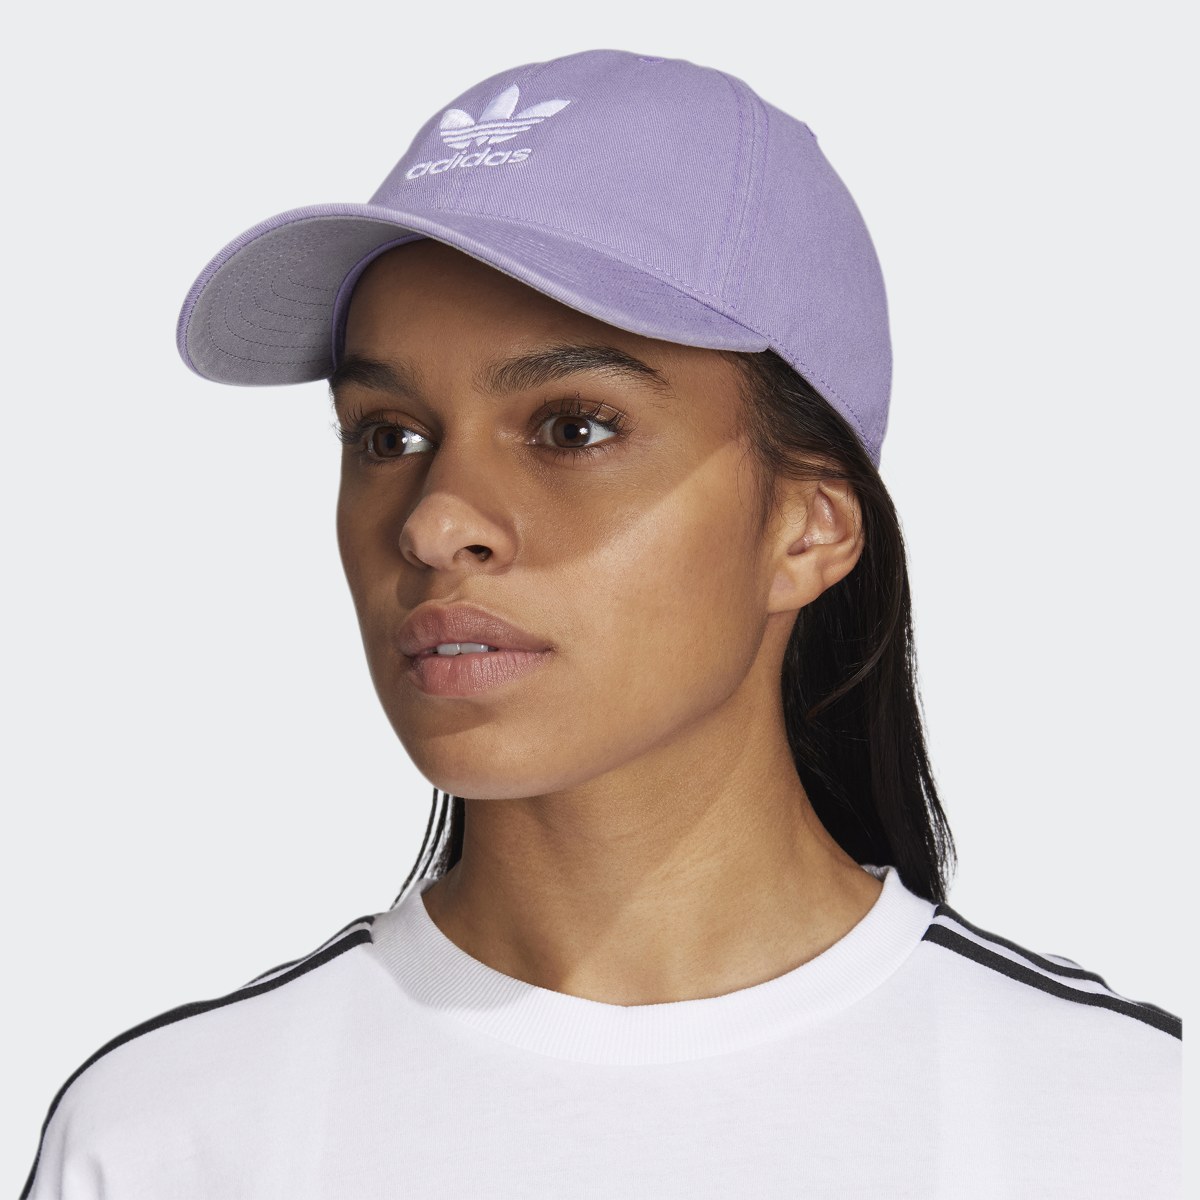 Adidas Relaxed Strap Back Hat. 5